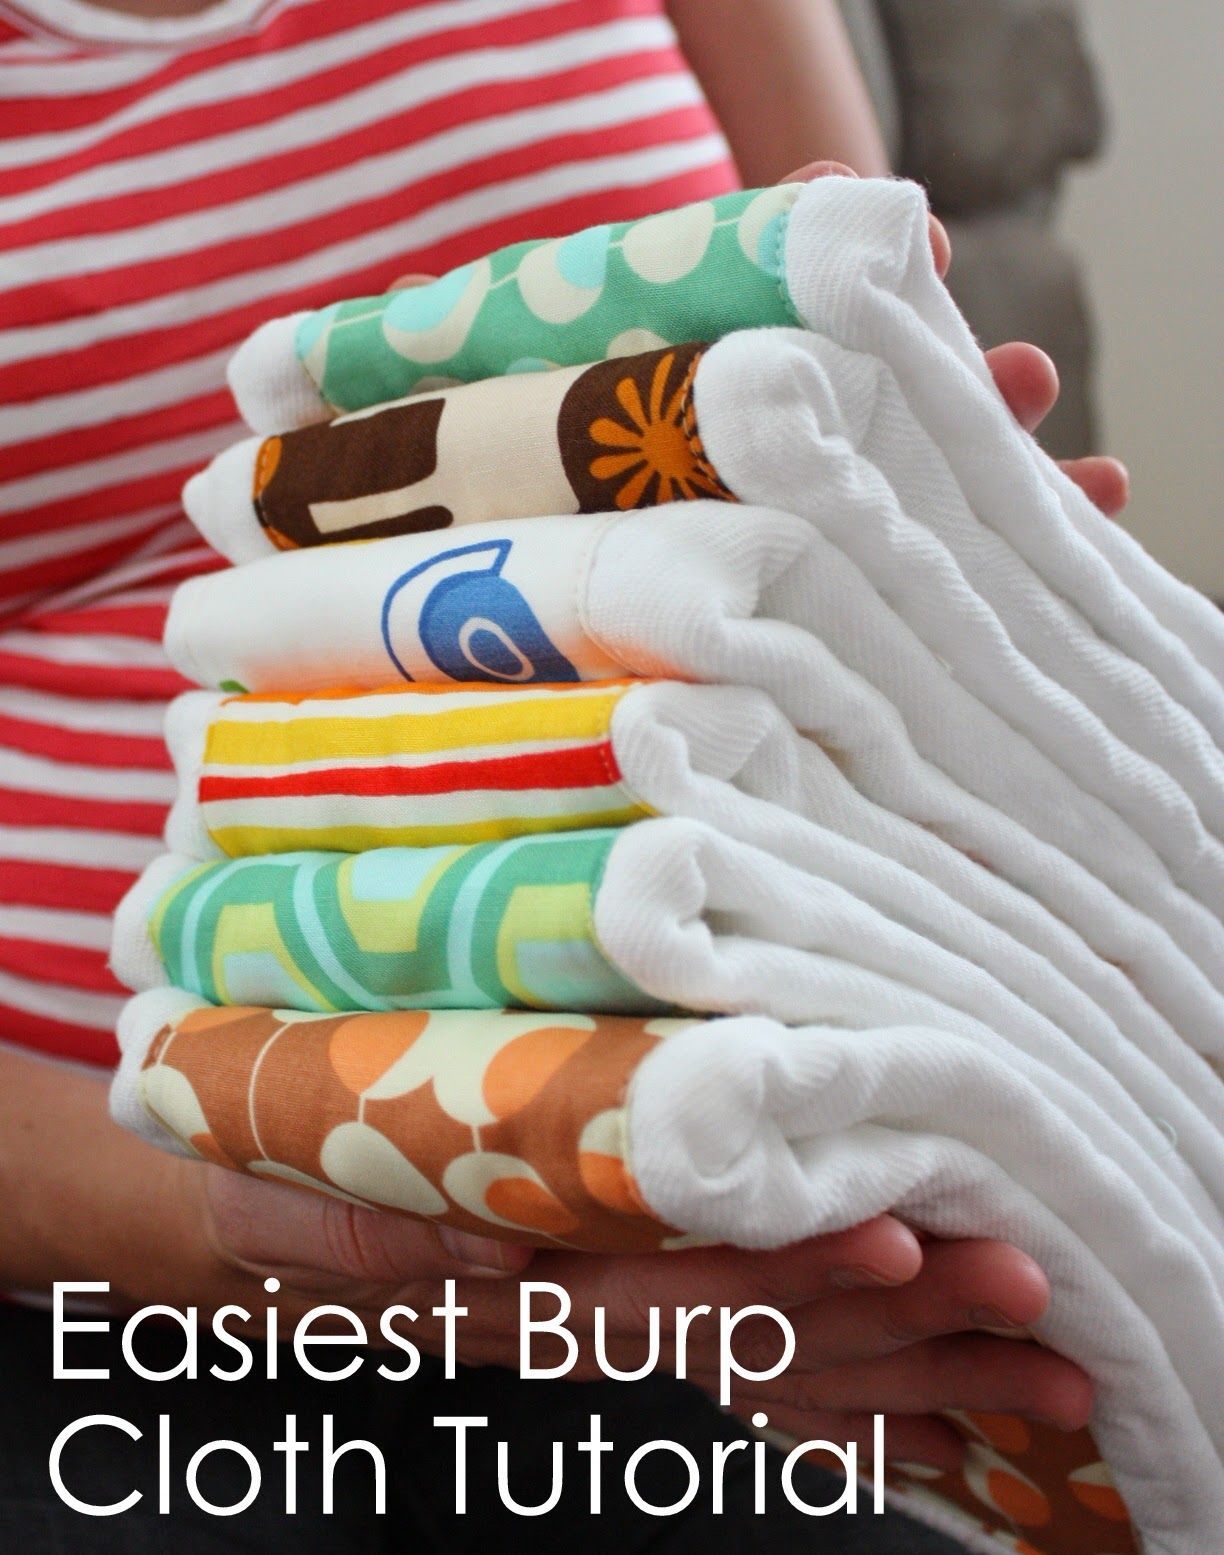 Diary of a Quilter – a quilt blog: Perhaps the easiest burp-cloth tutorial ever.